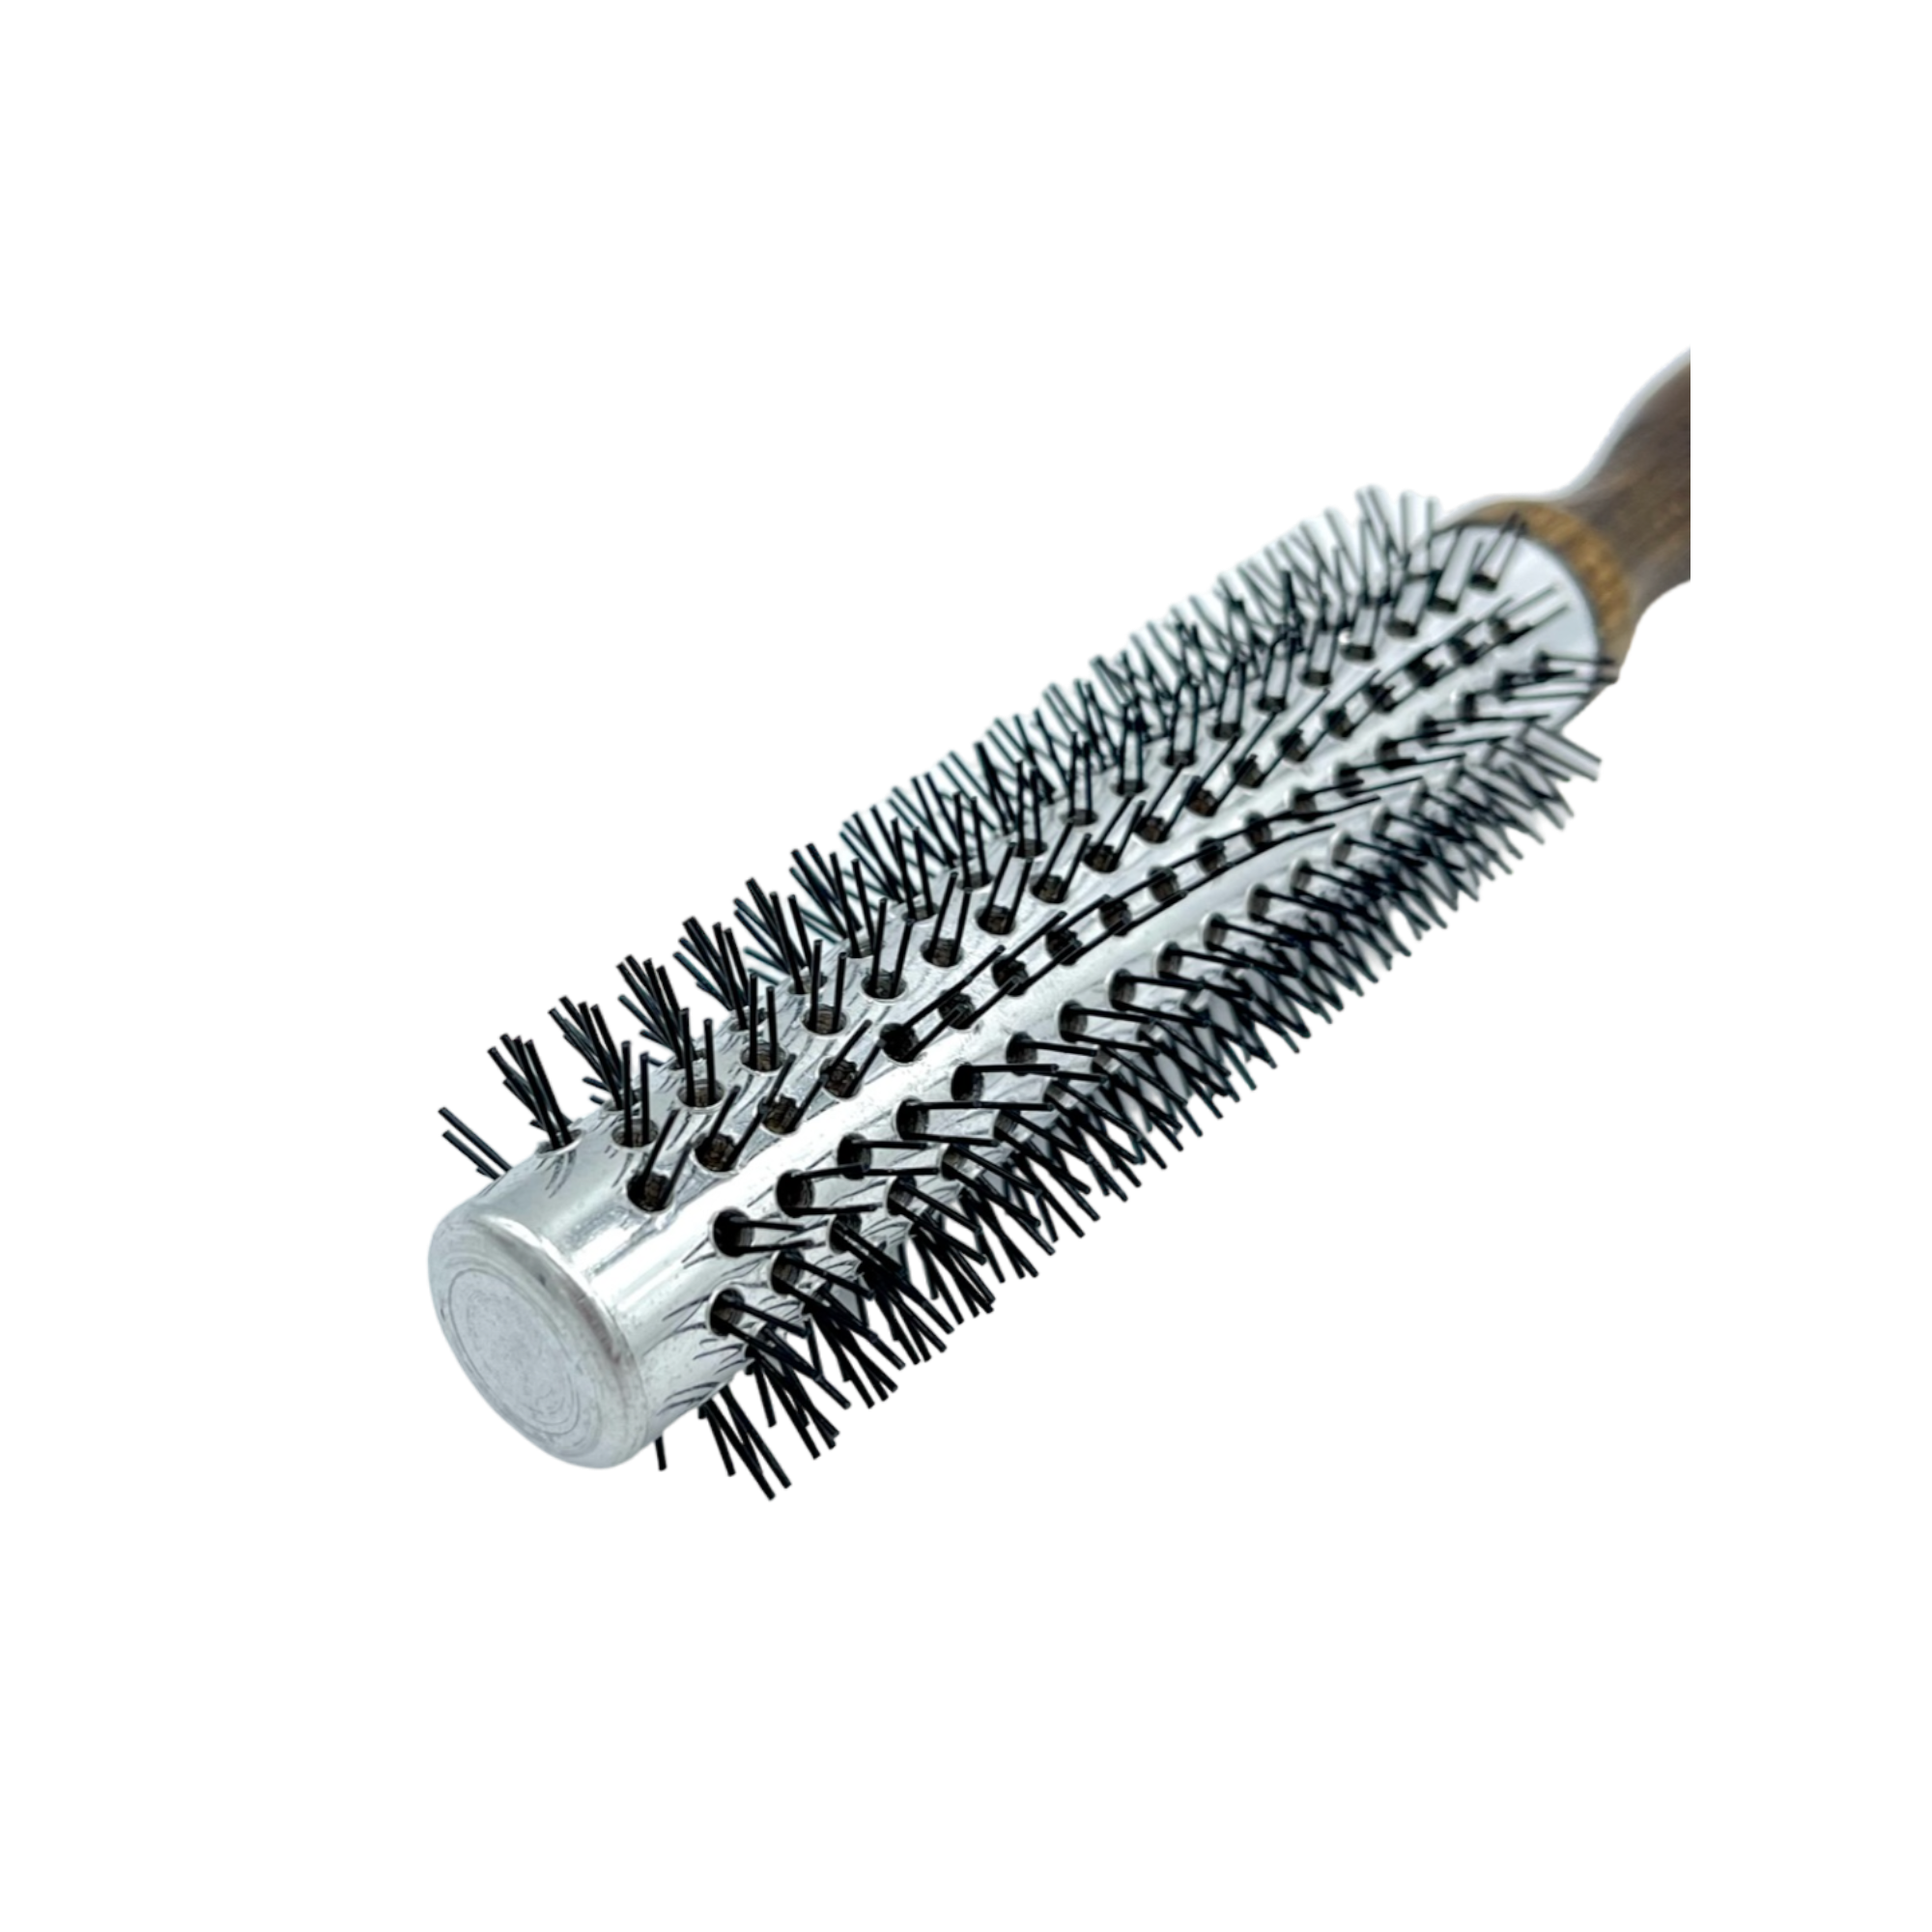 Dural Beech wood QuickStyler hair brush with nylon pins - 14 rows